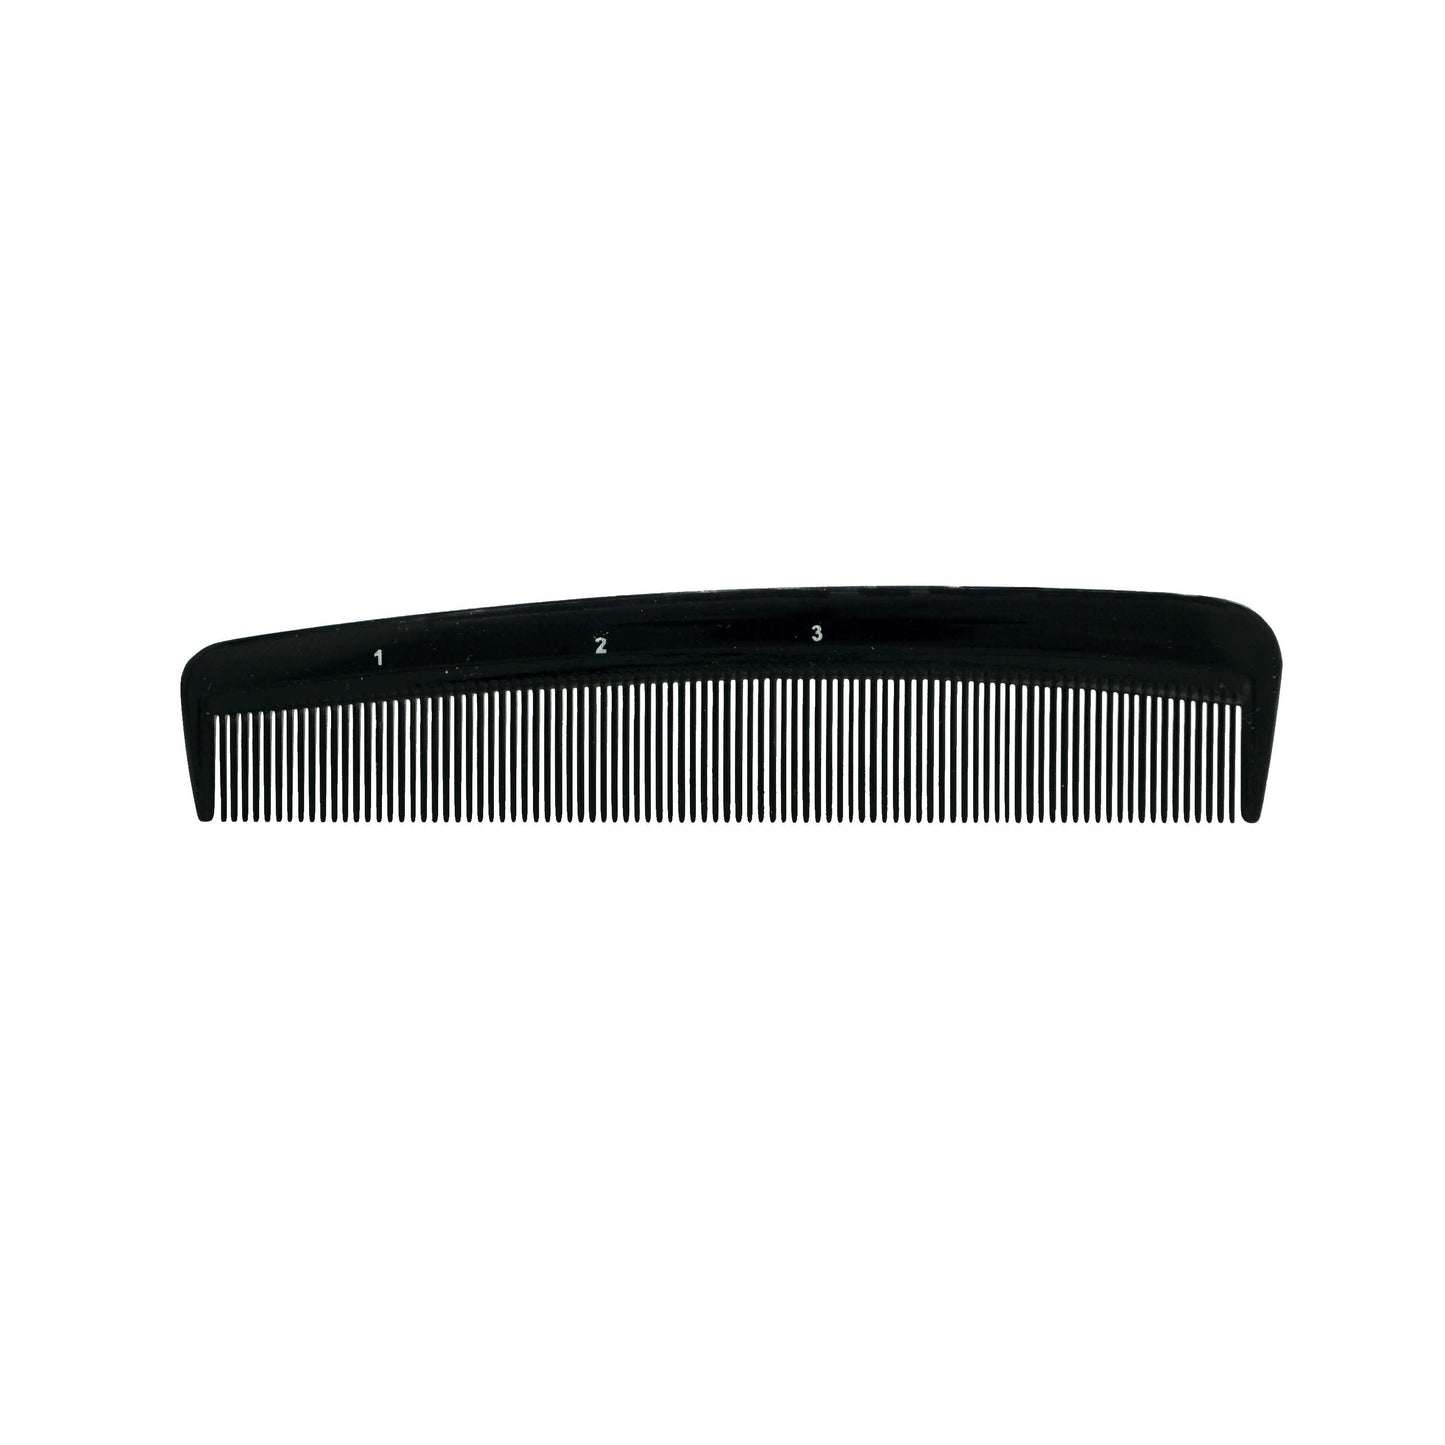 Pegasus 604, 5in Hard Rubber Fine Tooth Pocket Comb, Handmade, Seamless, Smooth Edges, Anti Static, Heat and Chemically Resistant, Portable Pocket Purse Mustache Comb | Peines de goma dura - Black